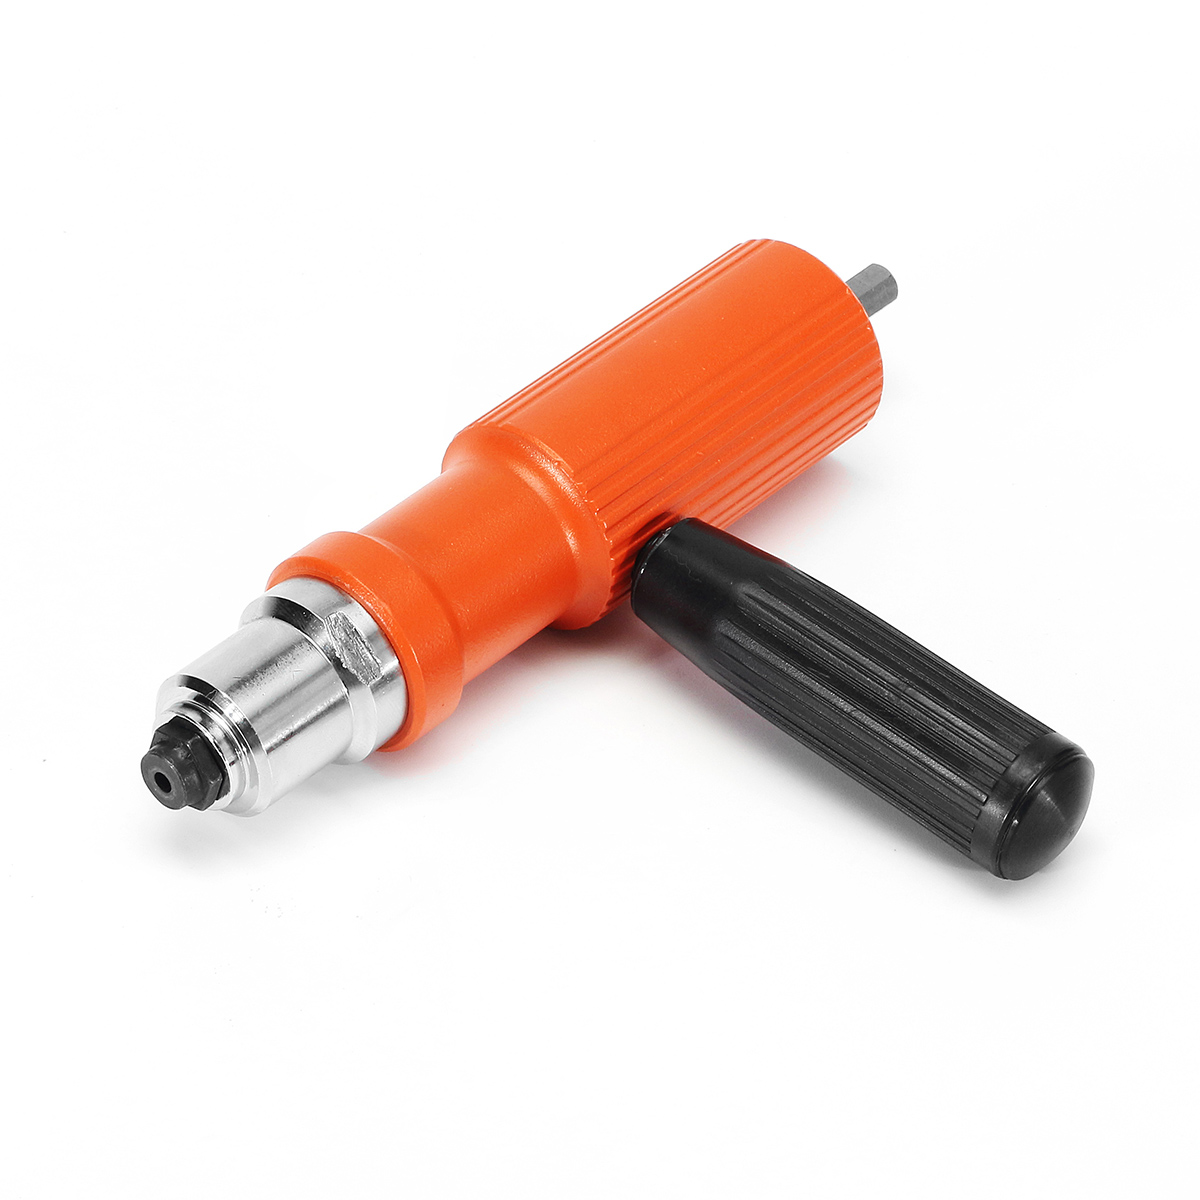 Drillpro-Upgraded-Electric-Rivet-Nut-Attachment-Cordless-Riveting-Tool-Drill-Adapter-for-Electric-Dr-1285523-6